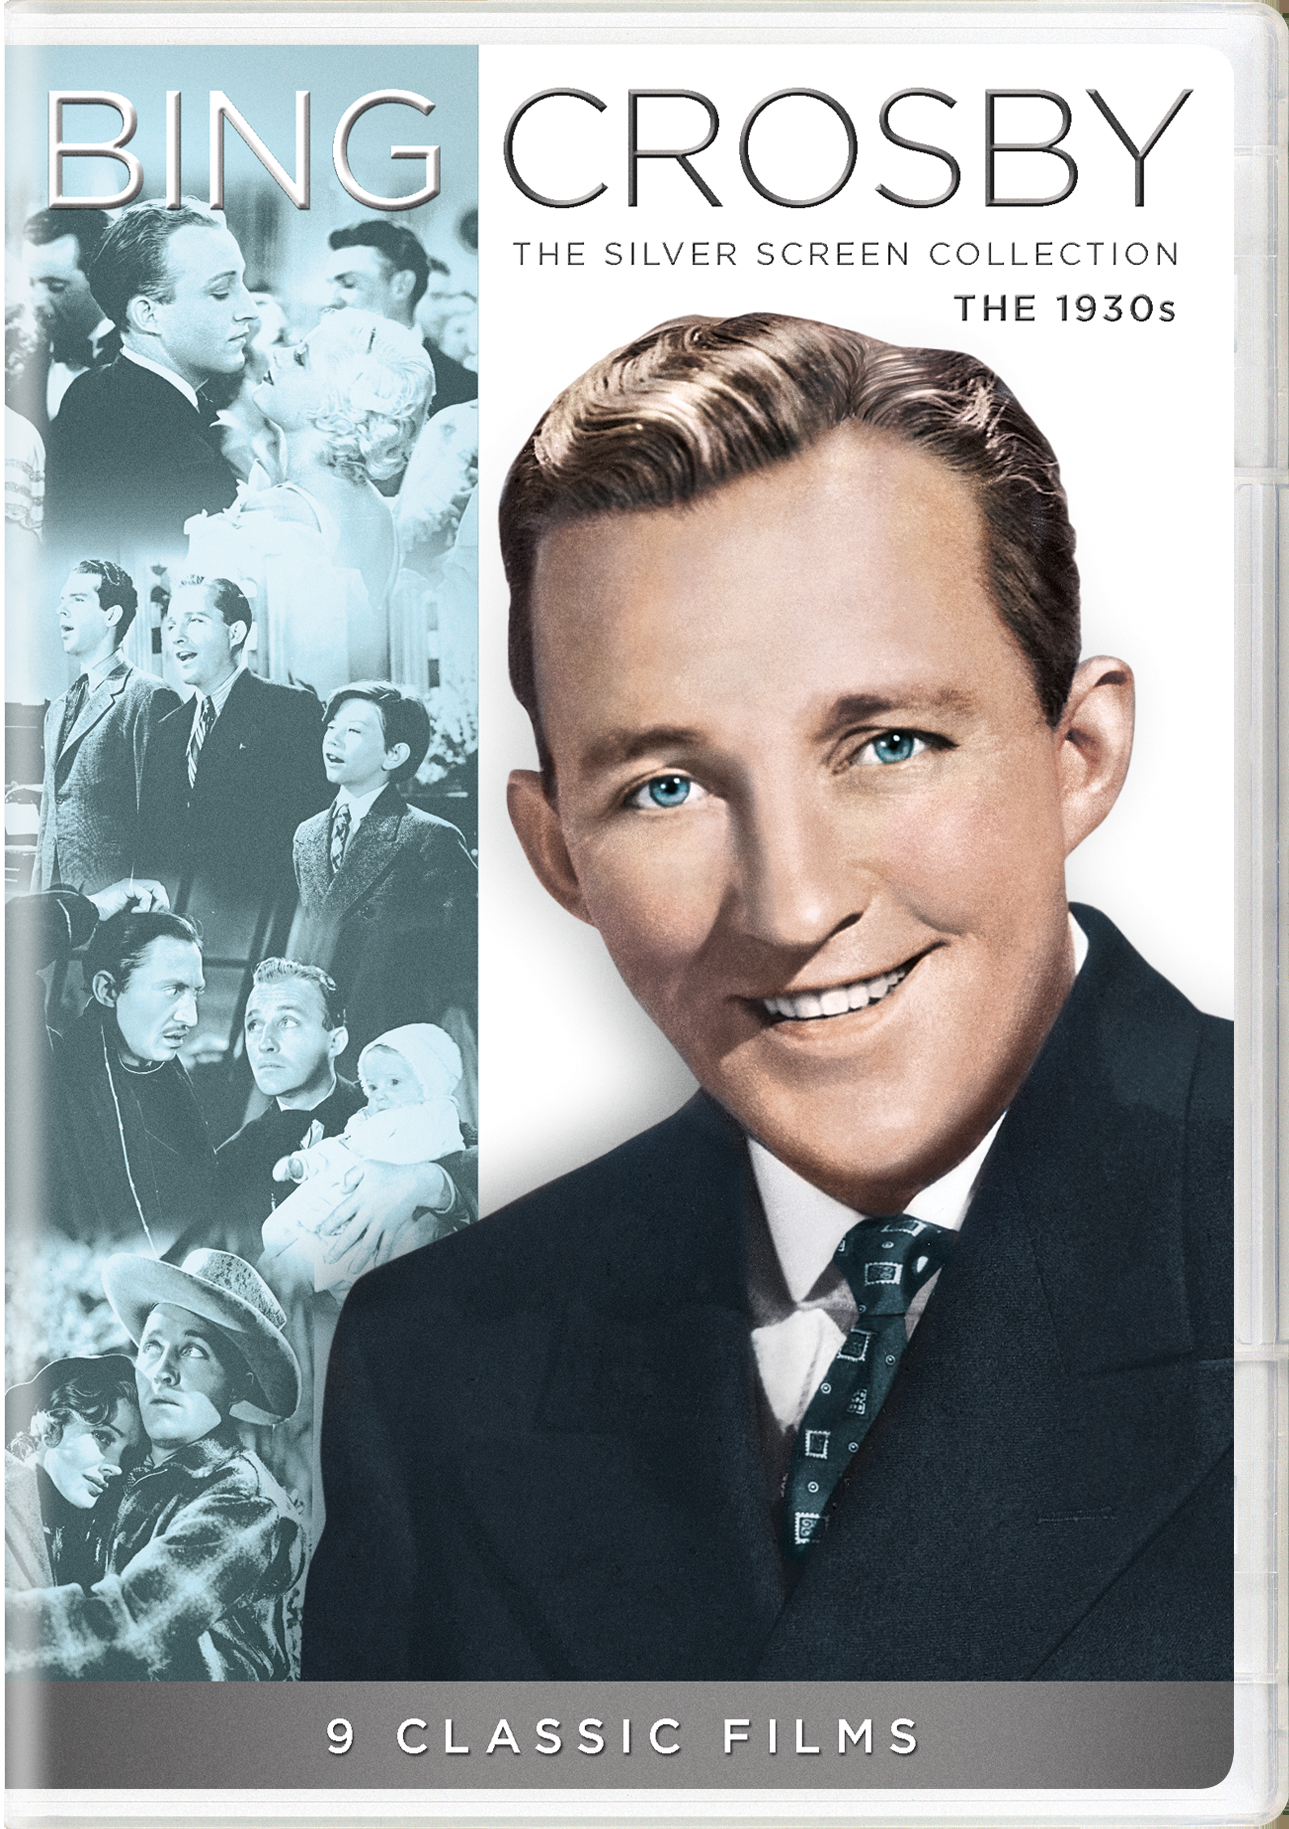 Bing Crosby: The Silver Screen Collection - The 1930s (Box Set) - DVD   - Musical Movies On DVD - Movies On GRUV